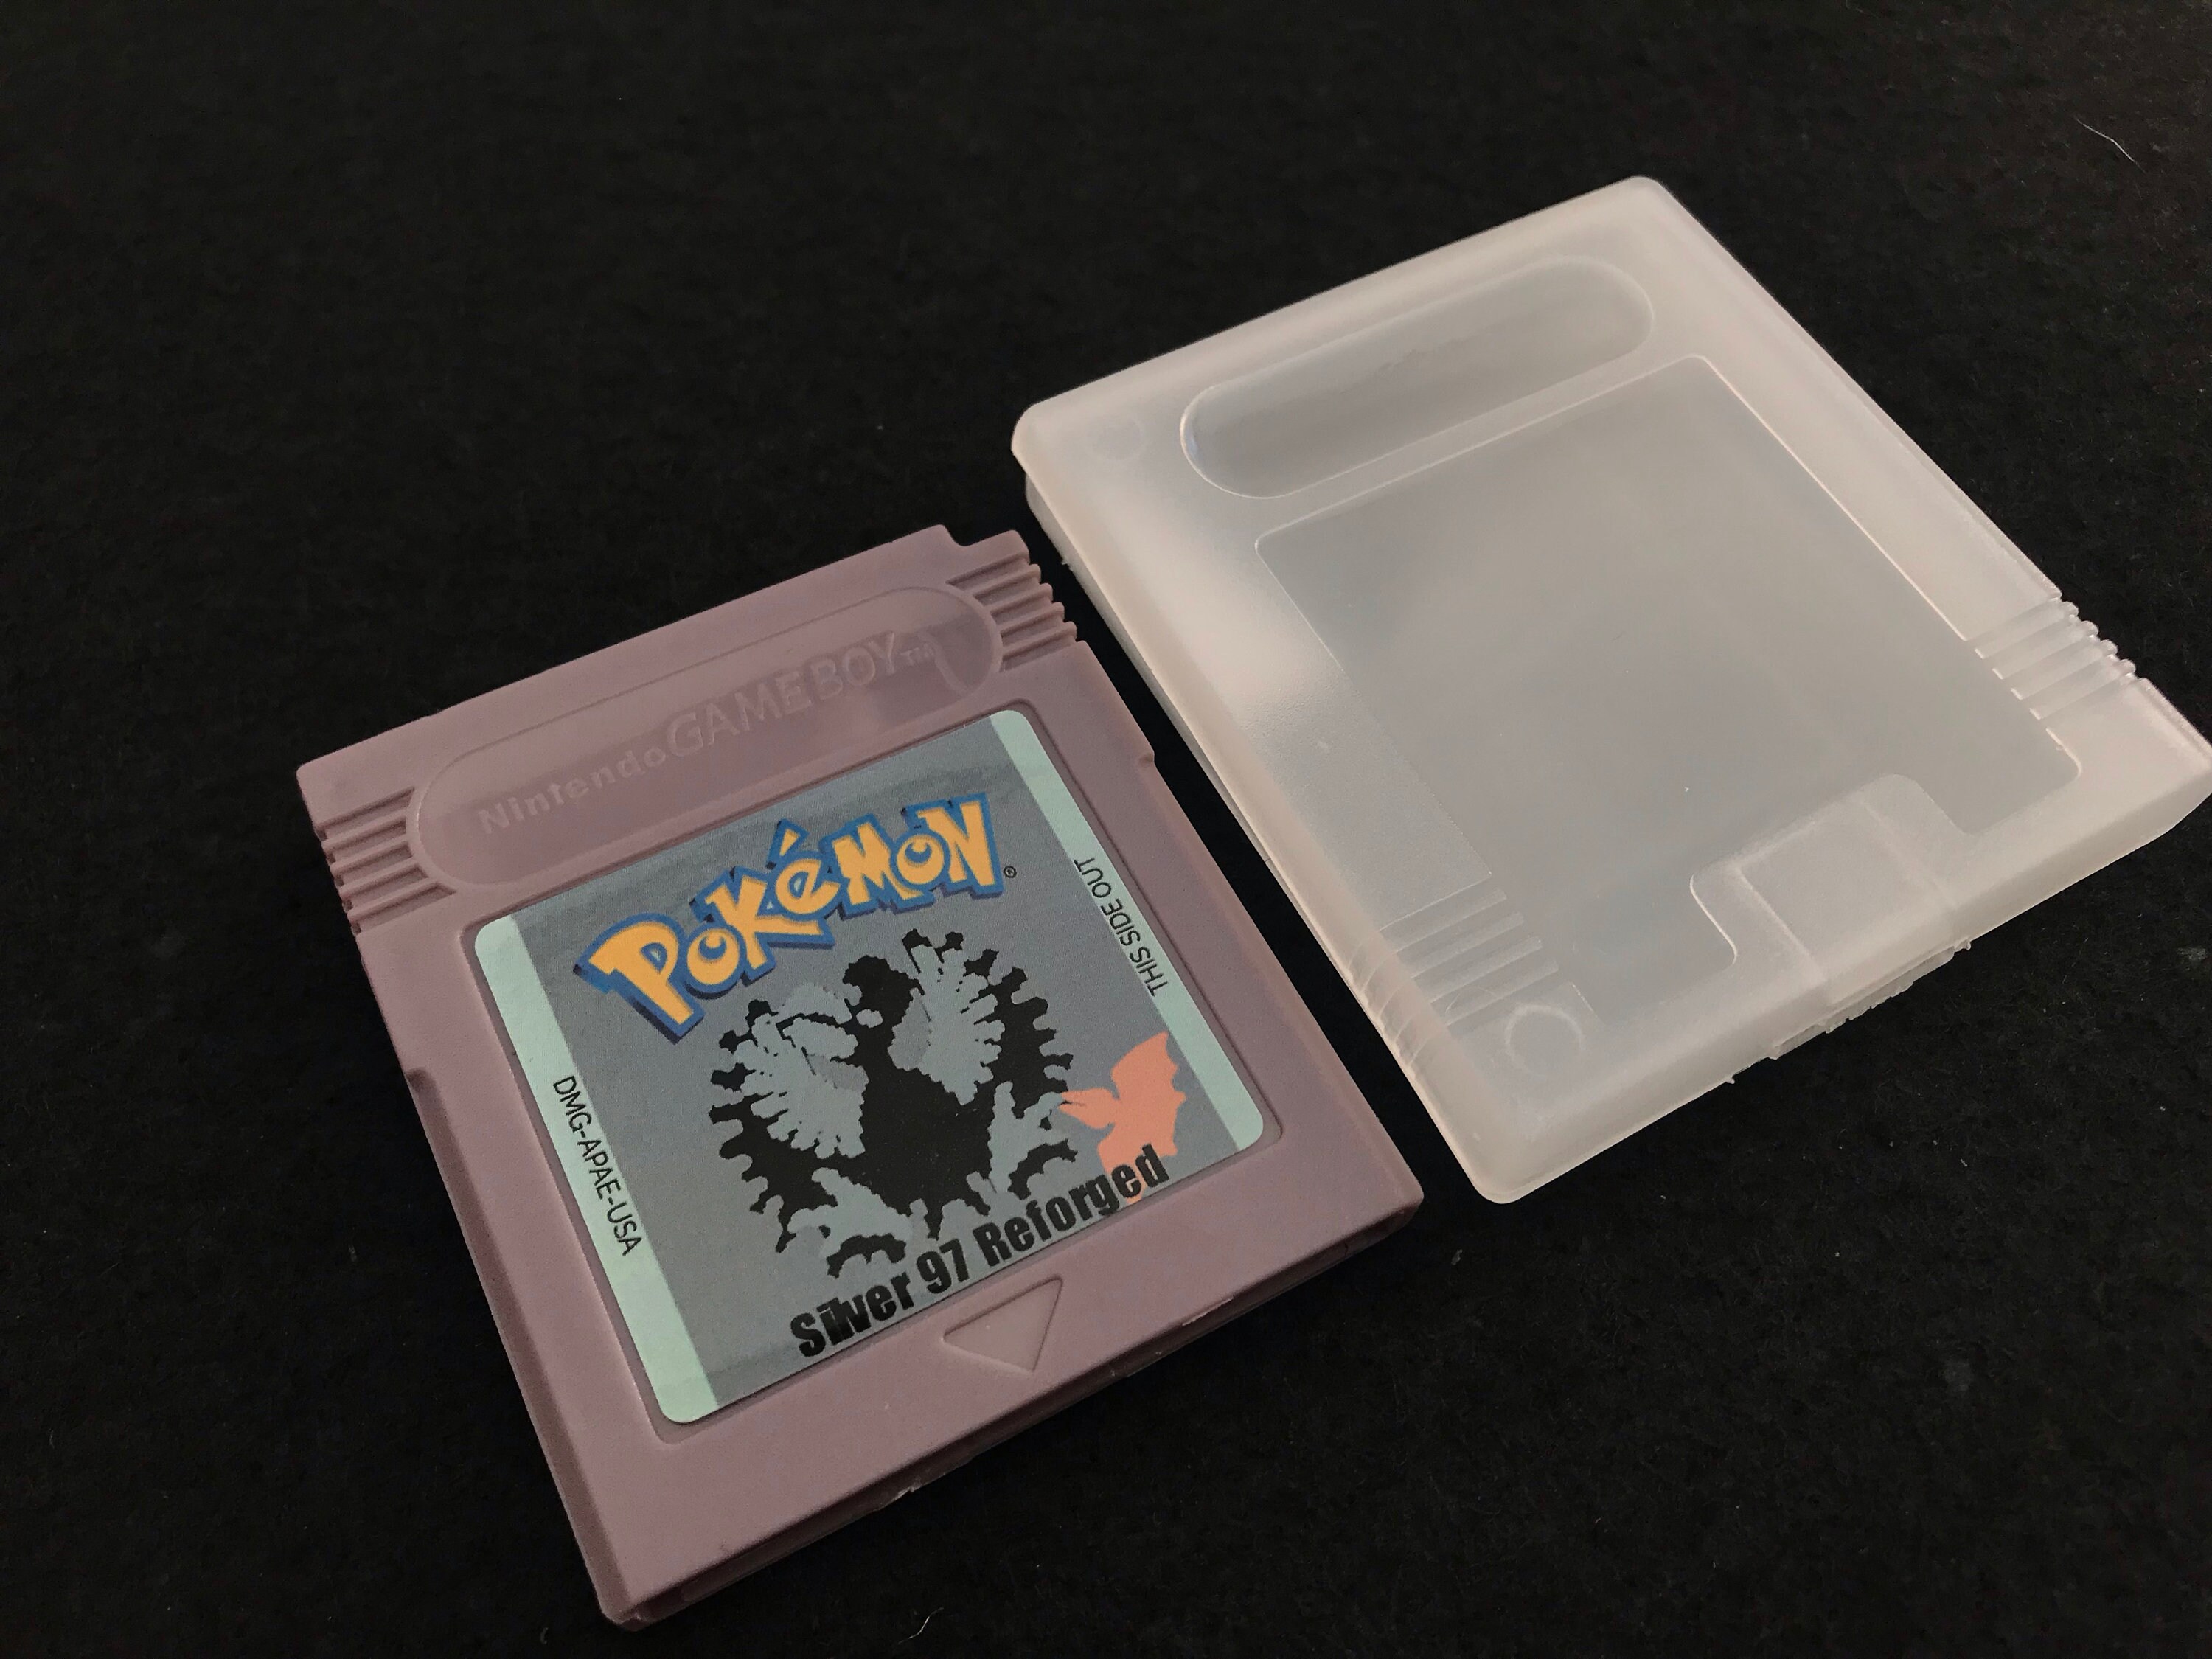 Crystal hack: - Pokémon Gold and Silver 97: Reforged (COMPLETE